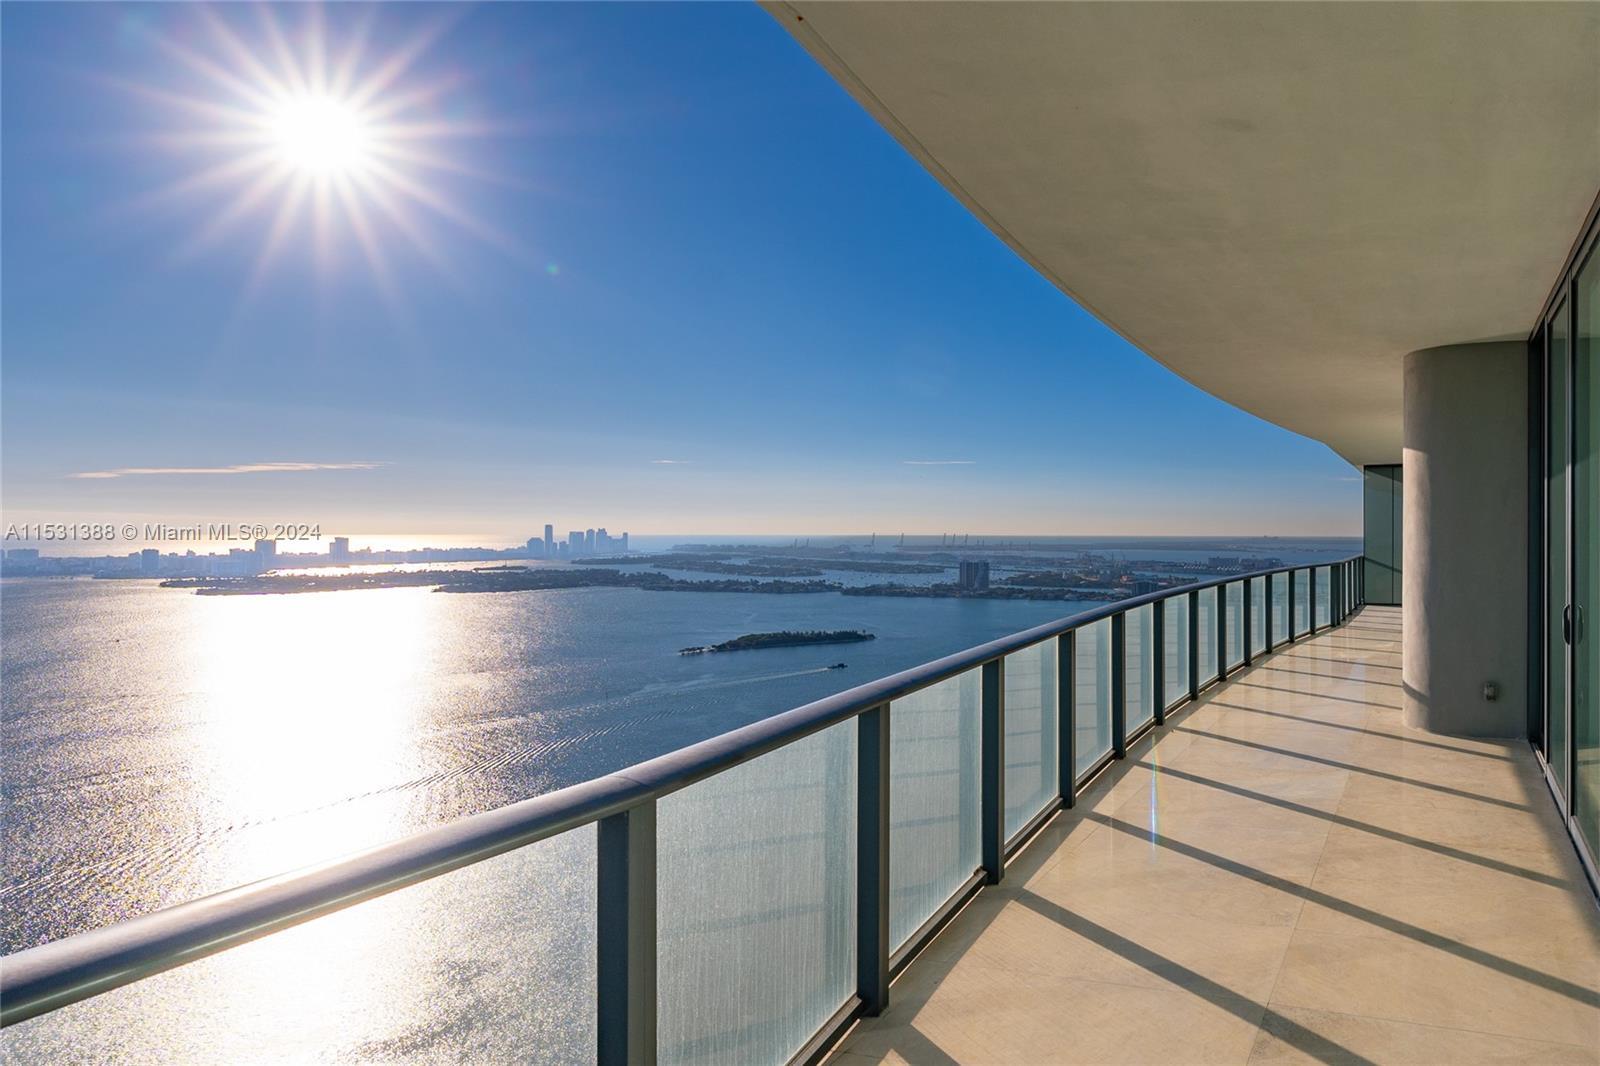 This breathtaking Penthouse on the 50th floor boasts endless Ocean and Bay views, epitomizing the es